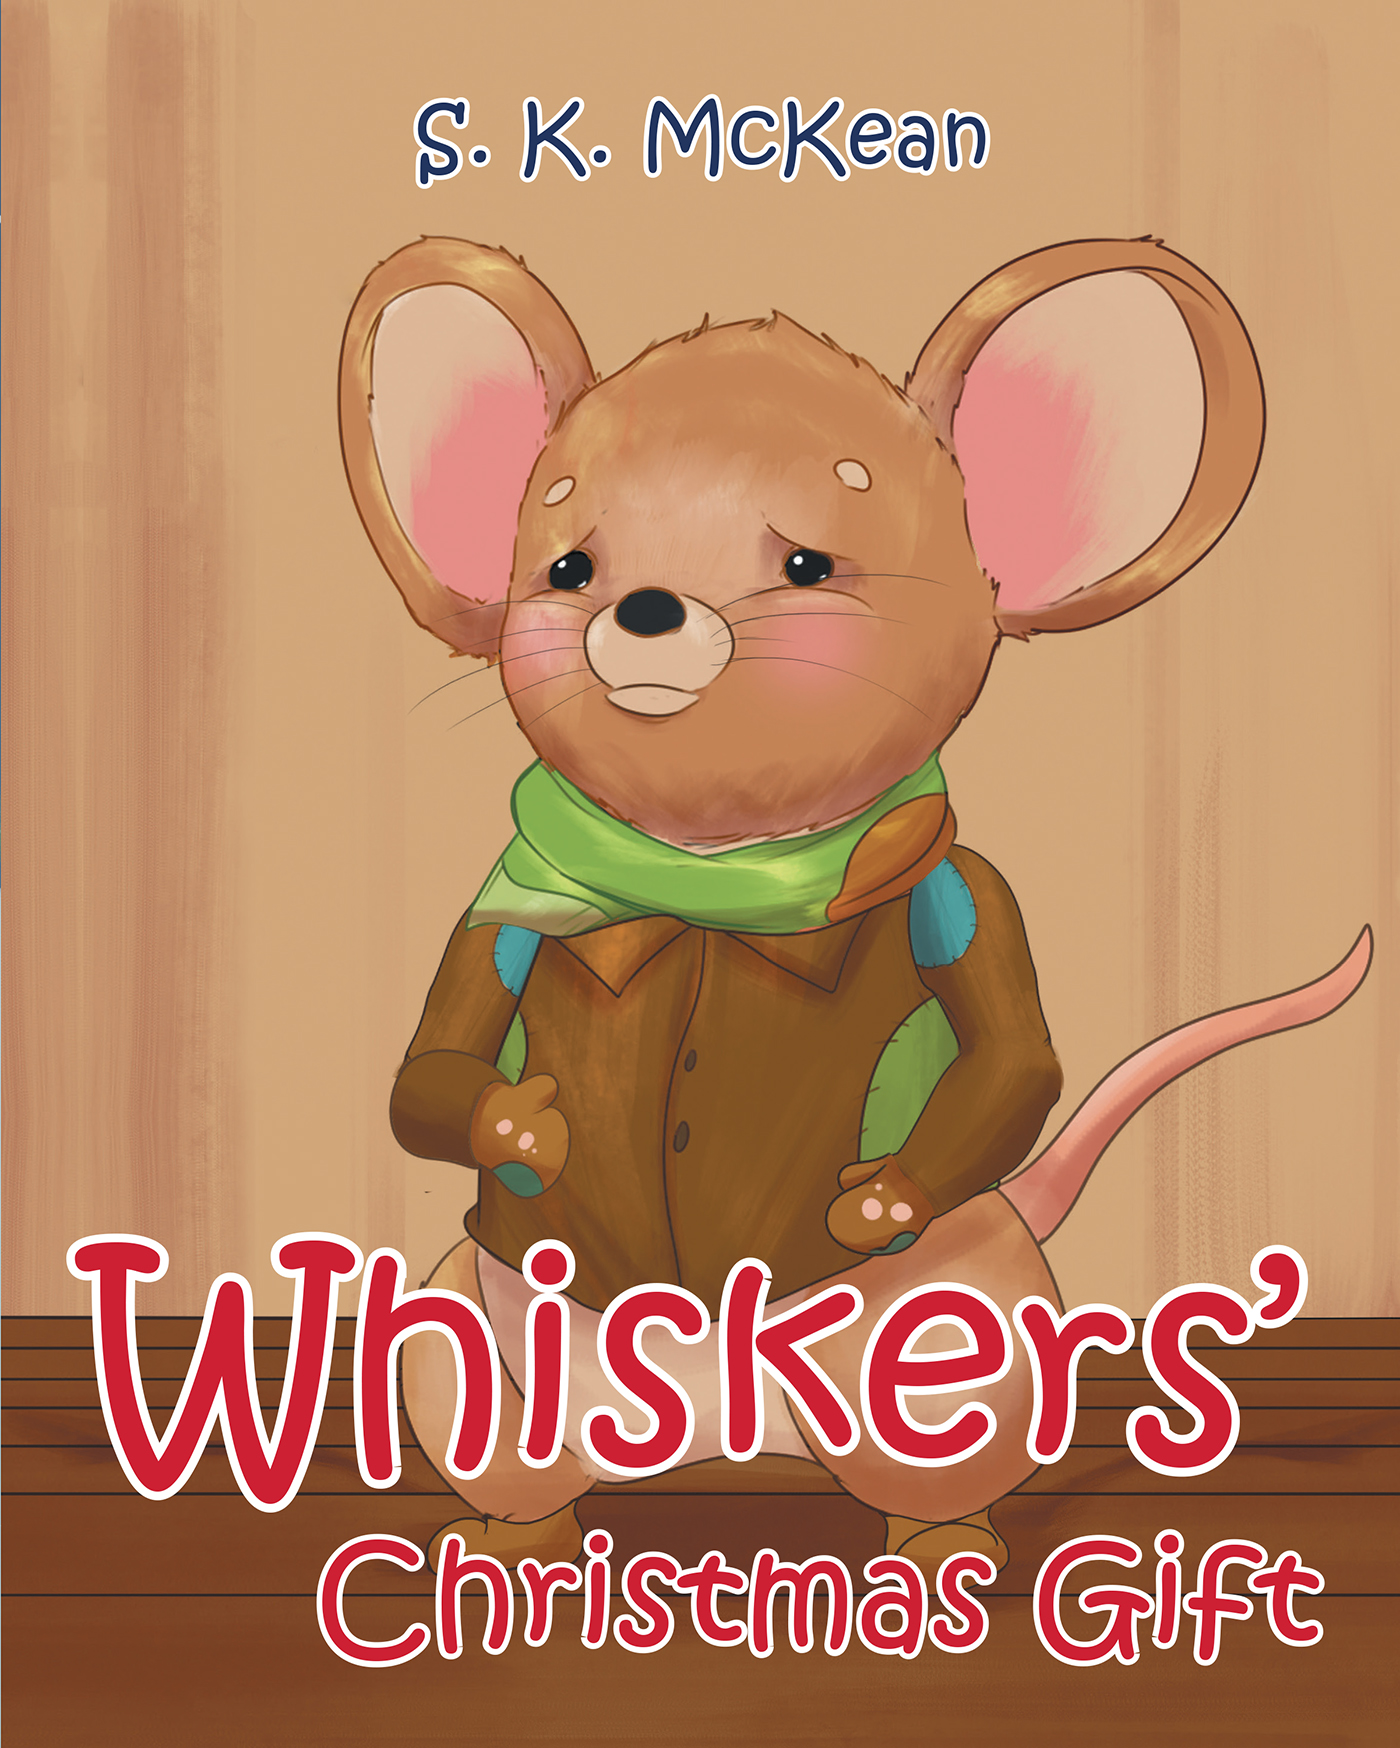 Whiskers' Christmas Gift Cover Image